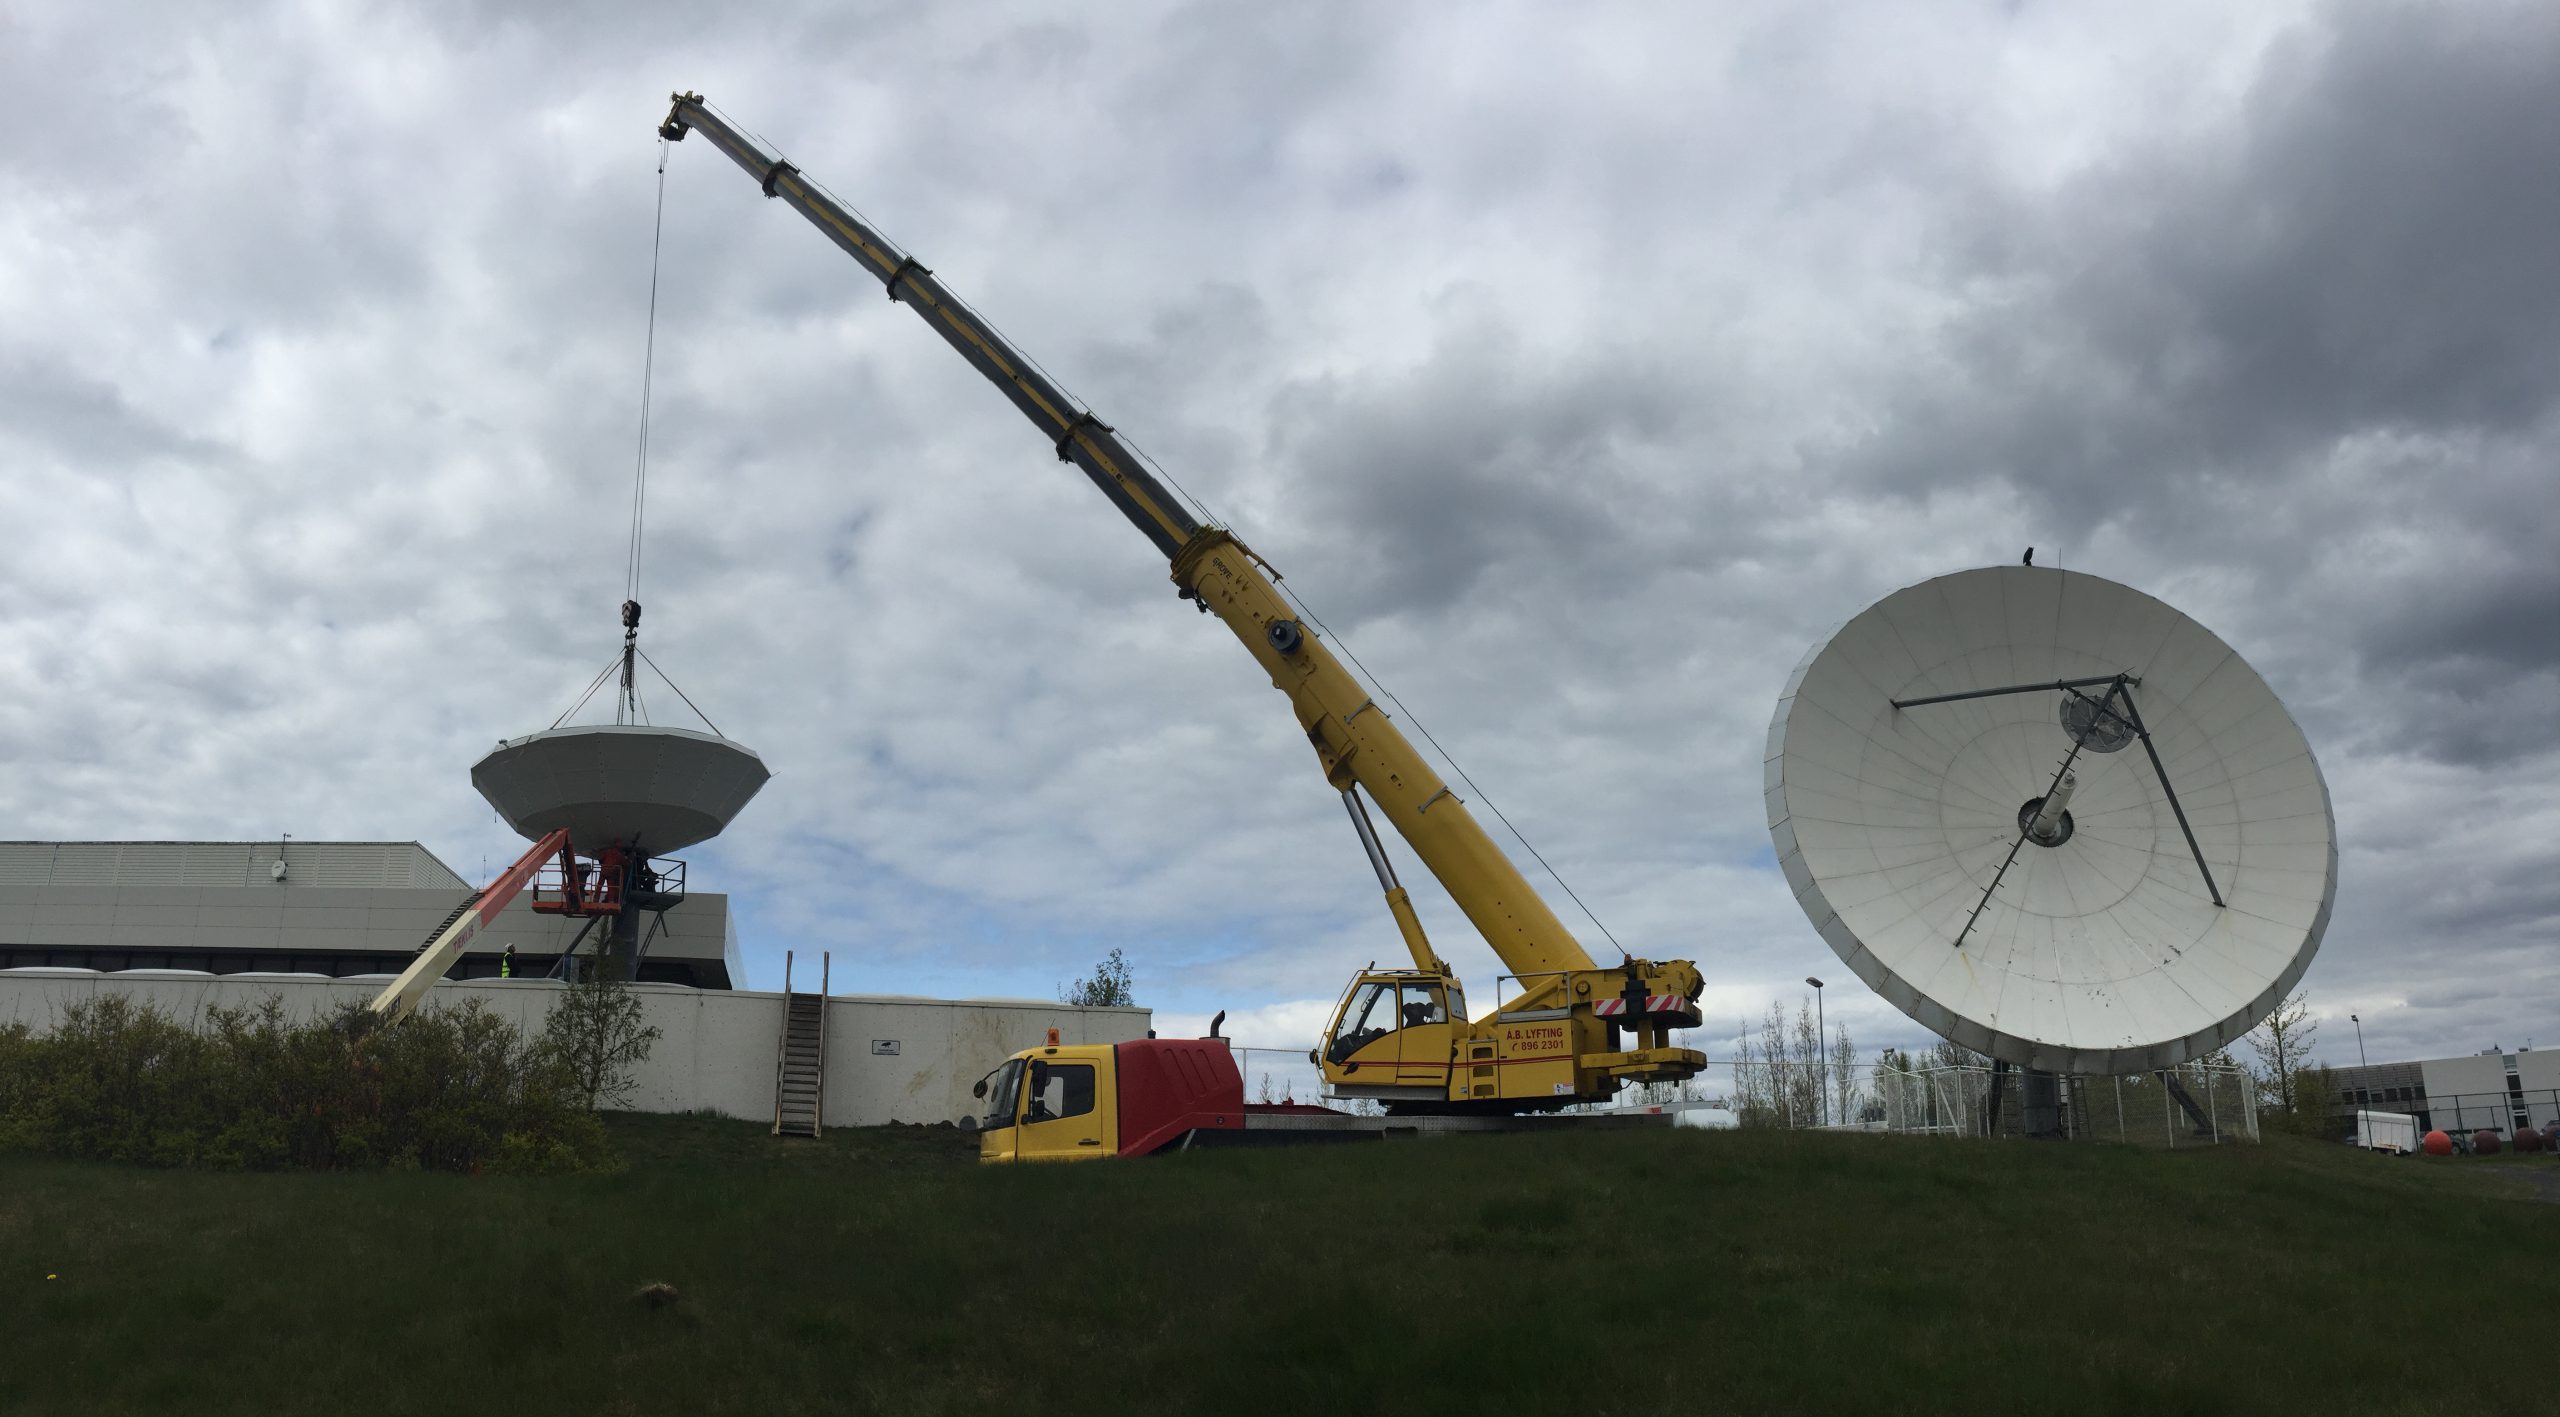 Skybrokers relocated a VertexRSI 8.1m Earth Station antenna for RÚV in Reykjavik, Iceland